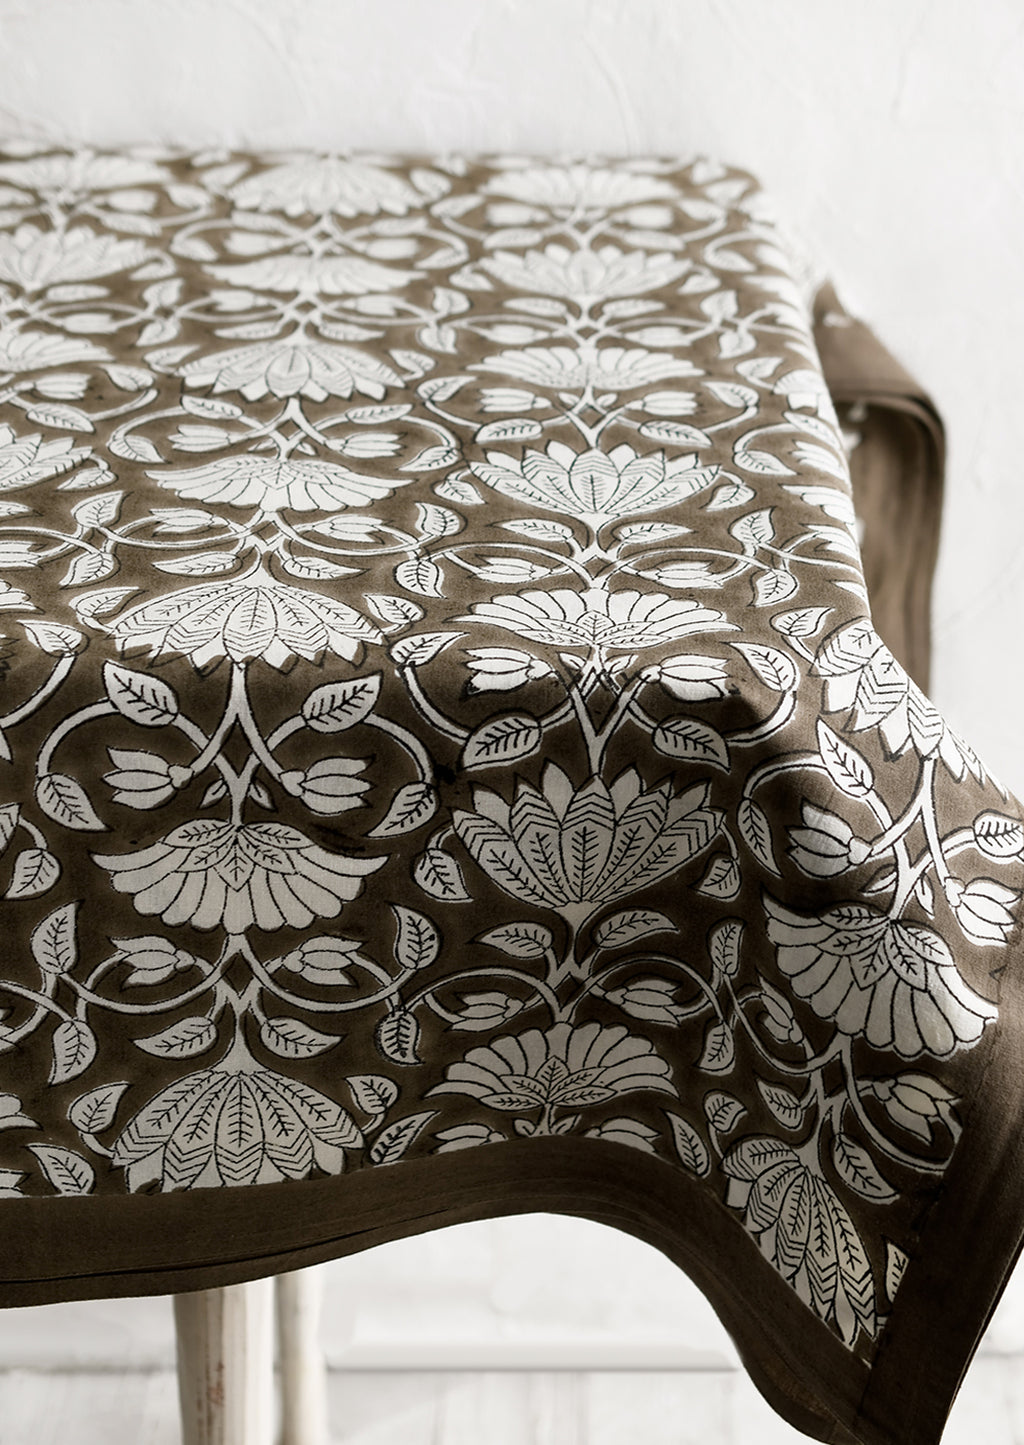 1: A block printed tablecloth with white lotus print on brown background.